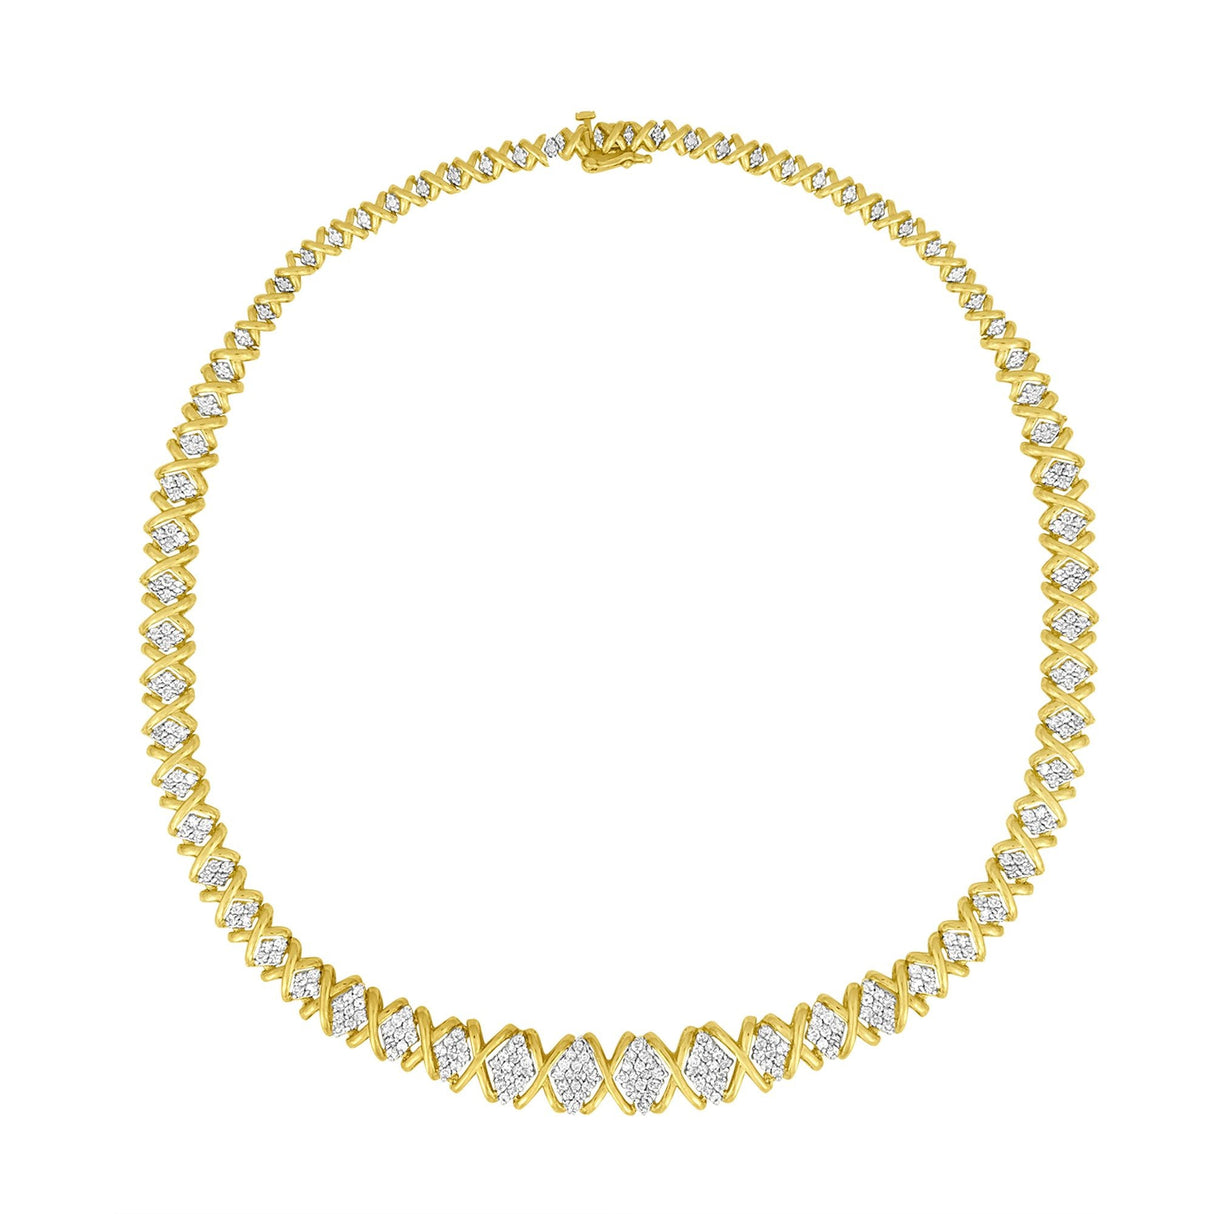 10K Yellow Gold 4 Cttw Brilliant Round-Cut Diamond Graduating Riviera Statement Necklace (H-I Color, I2-I3 Clarity) - Tuesday Morning-Necklaces